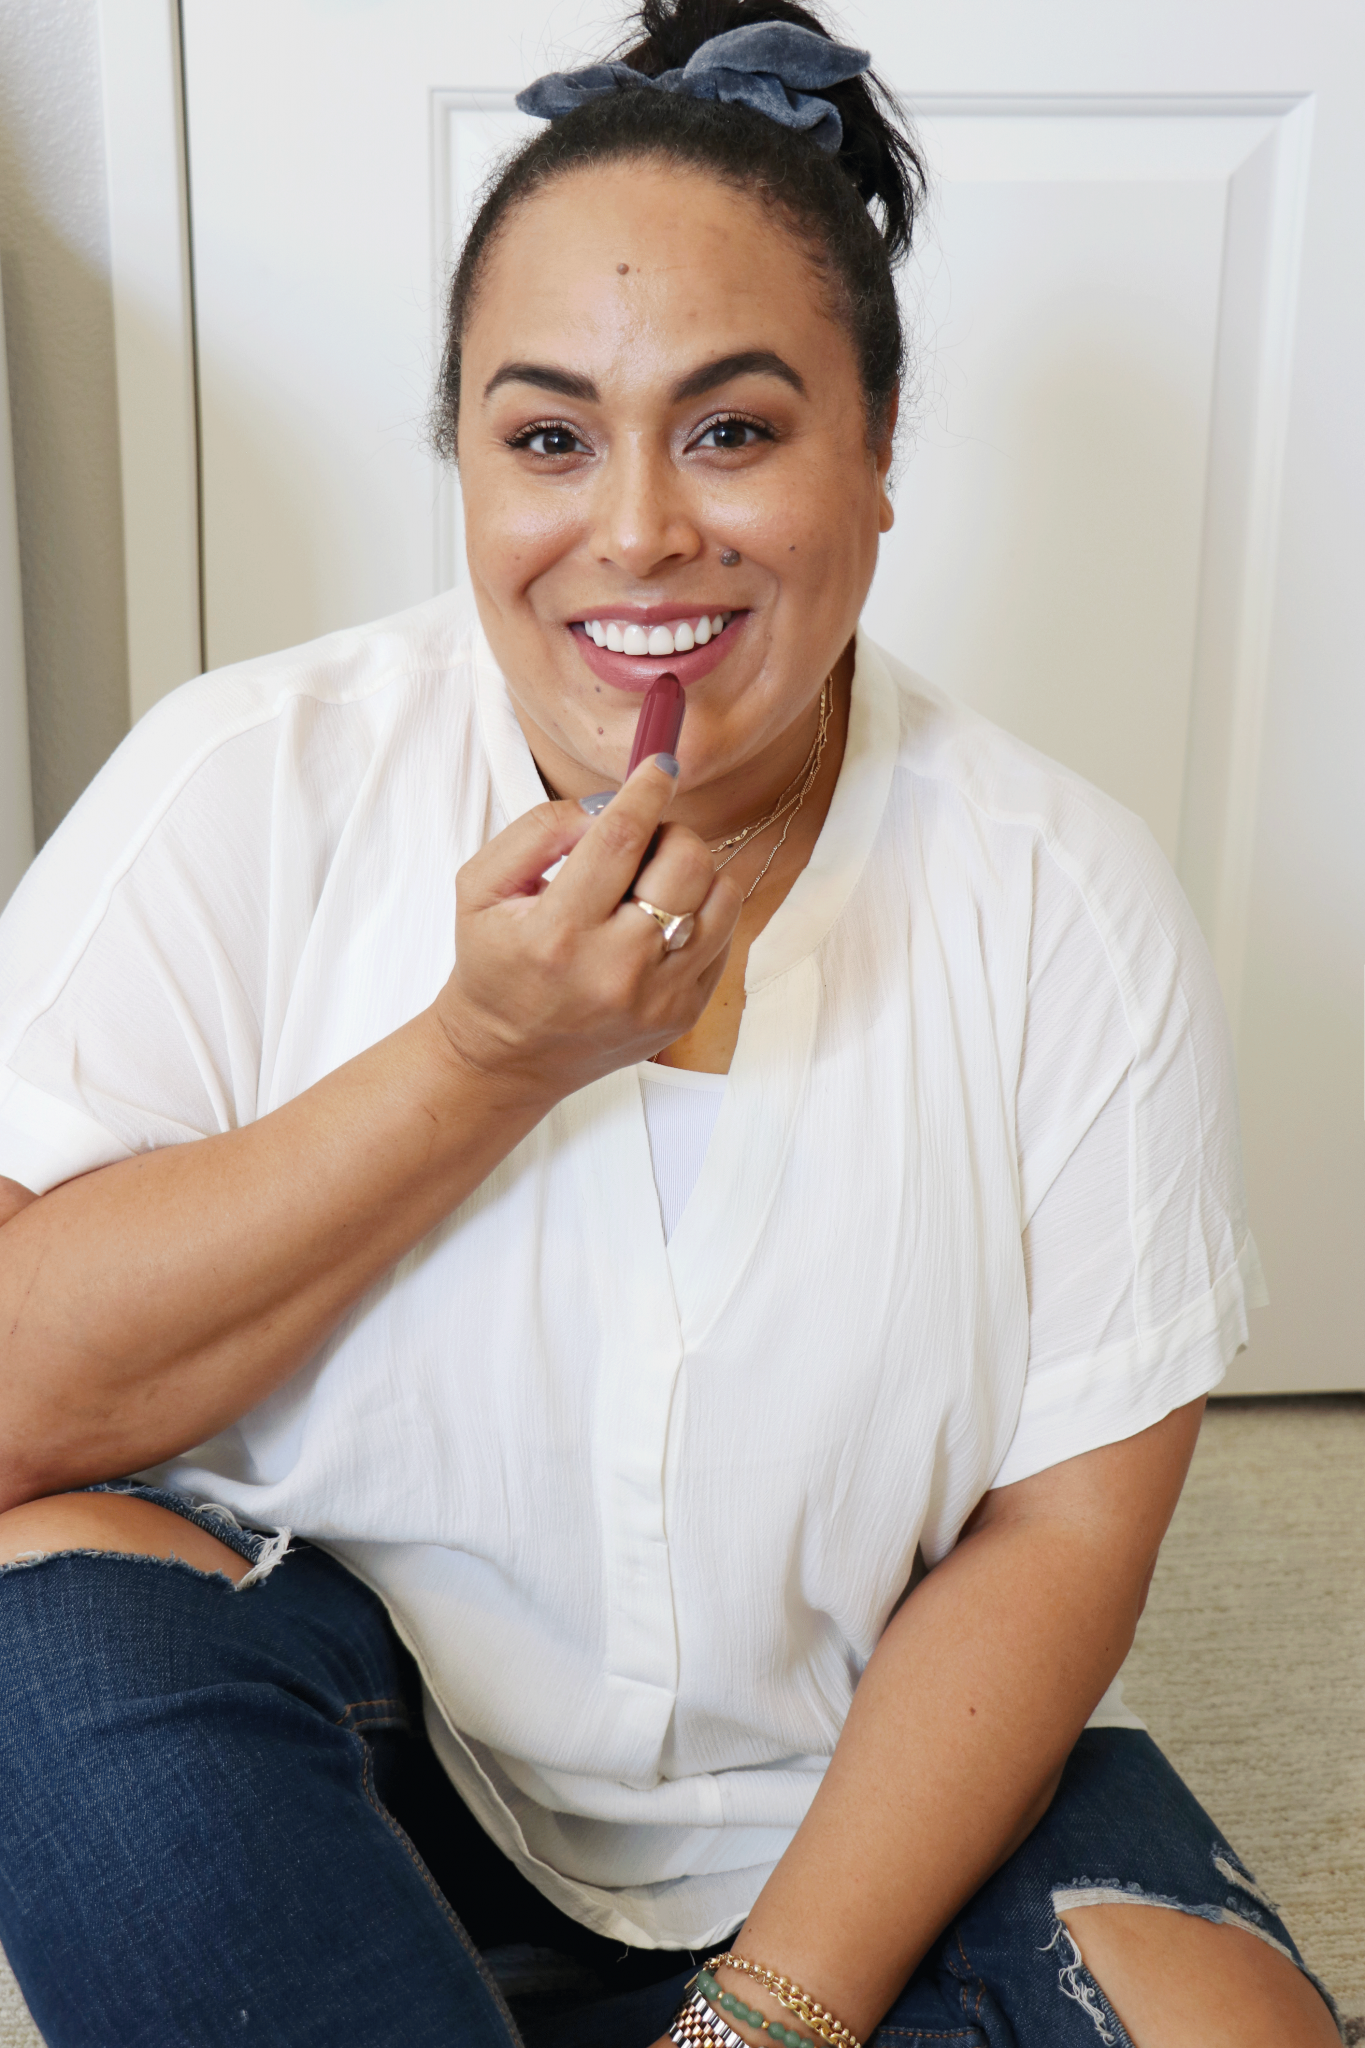 Let's be honest - working from home is in full effect. Looking for the perfect working from home beauty look without feeling overdone or underdone for those zoom call? Los Angeles blogger Jamie Lewis is sharing her top tips HERE!